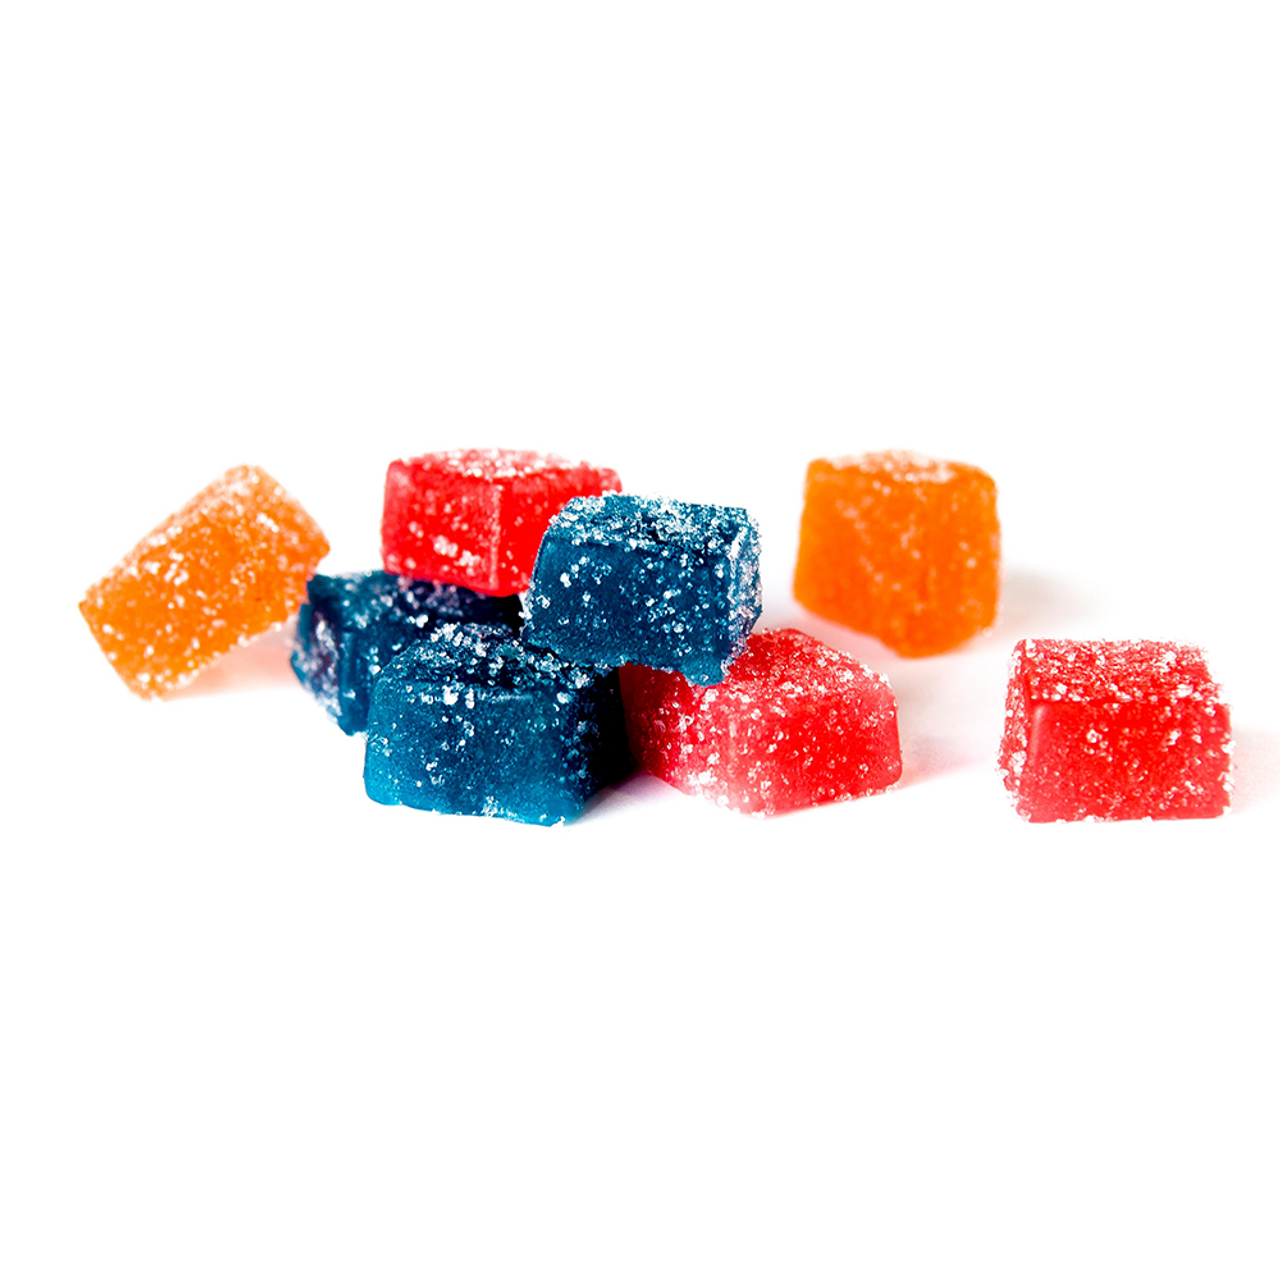 How to Use Delta 8 THC Gummies for Pain Management